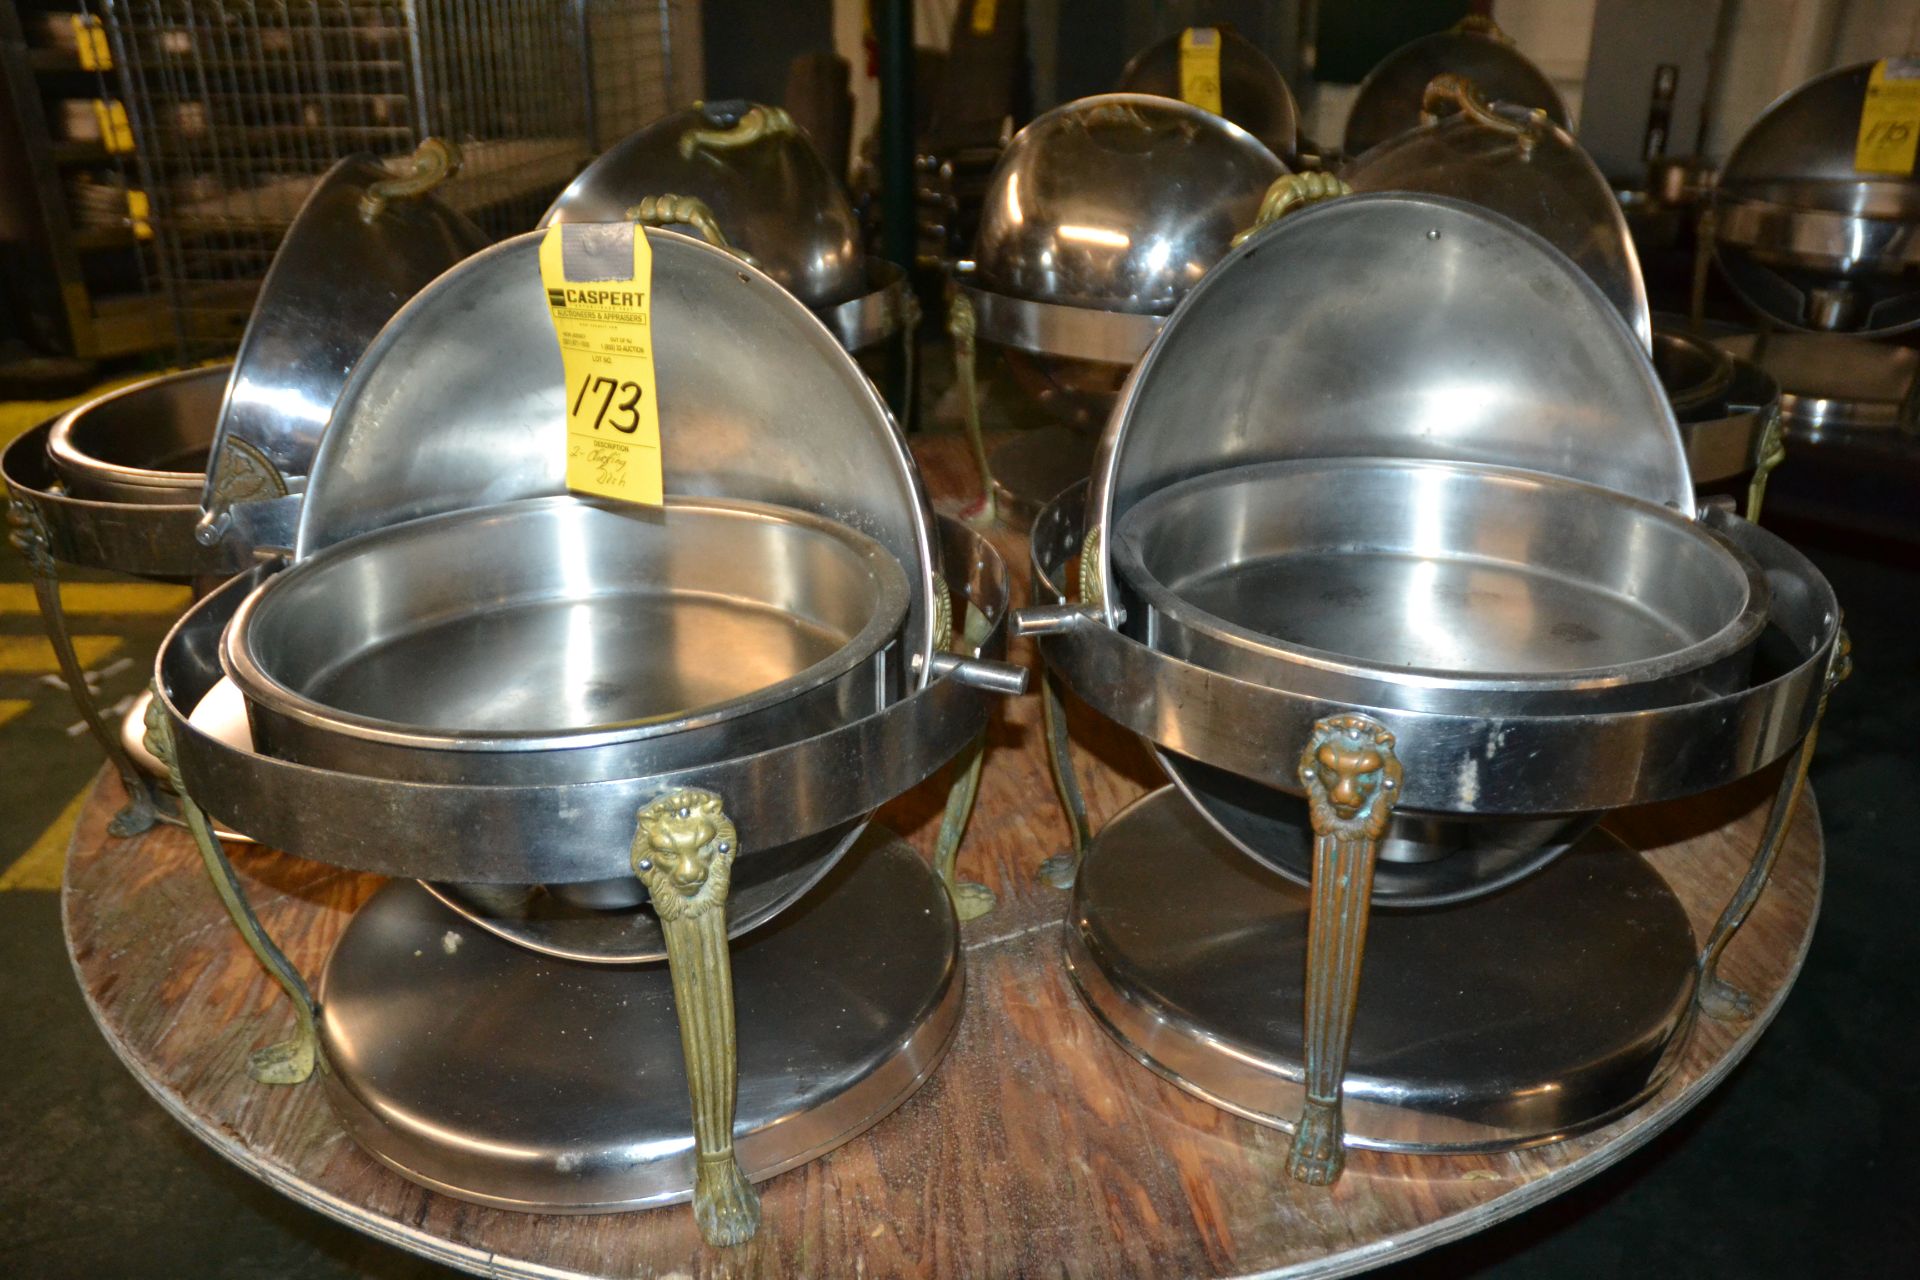 Complete Chafing Dishes